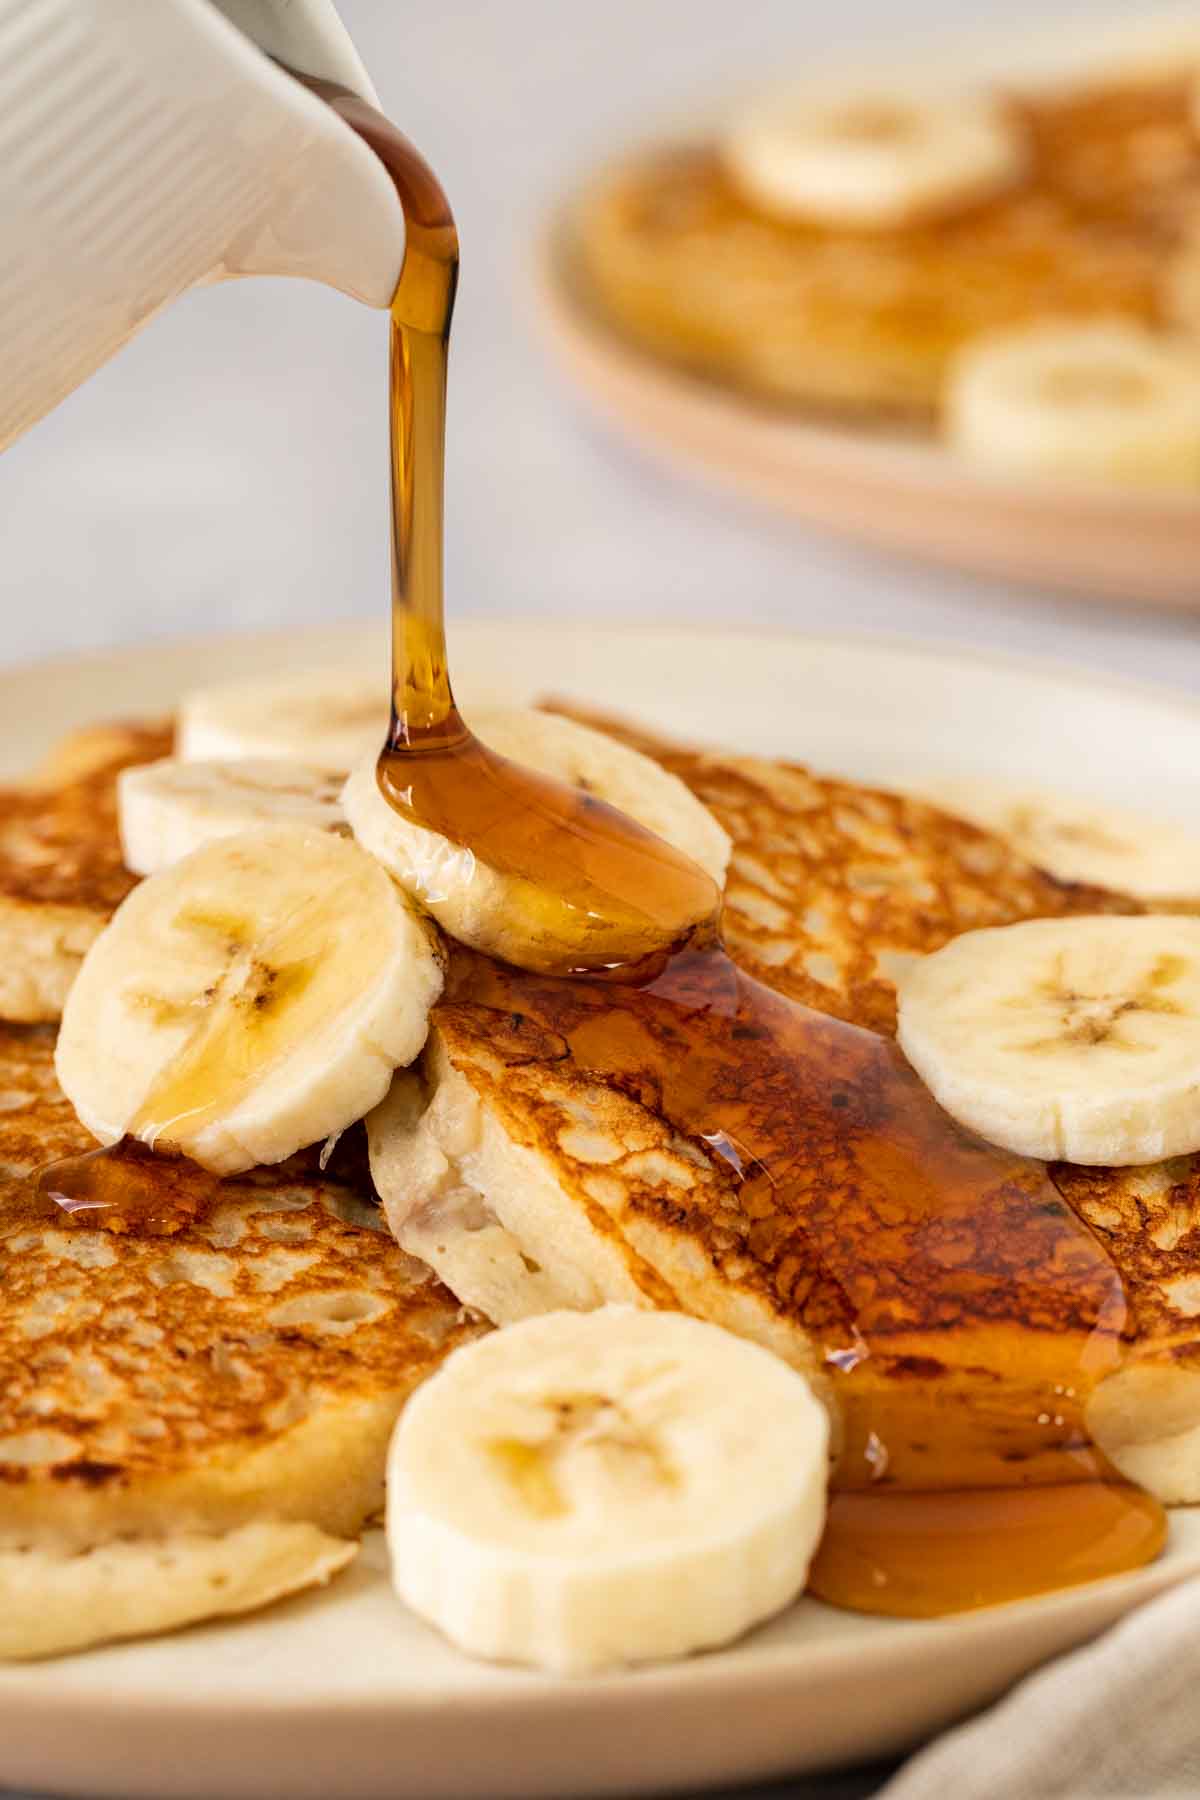 Banana Pancakes pouring syrup on pancakes on serving plate